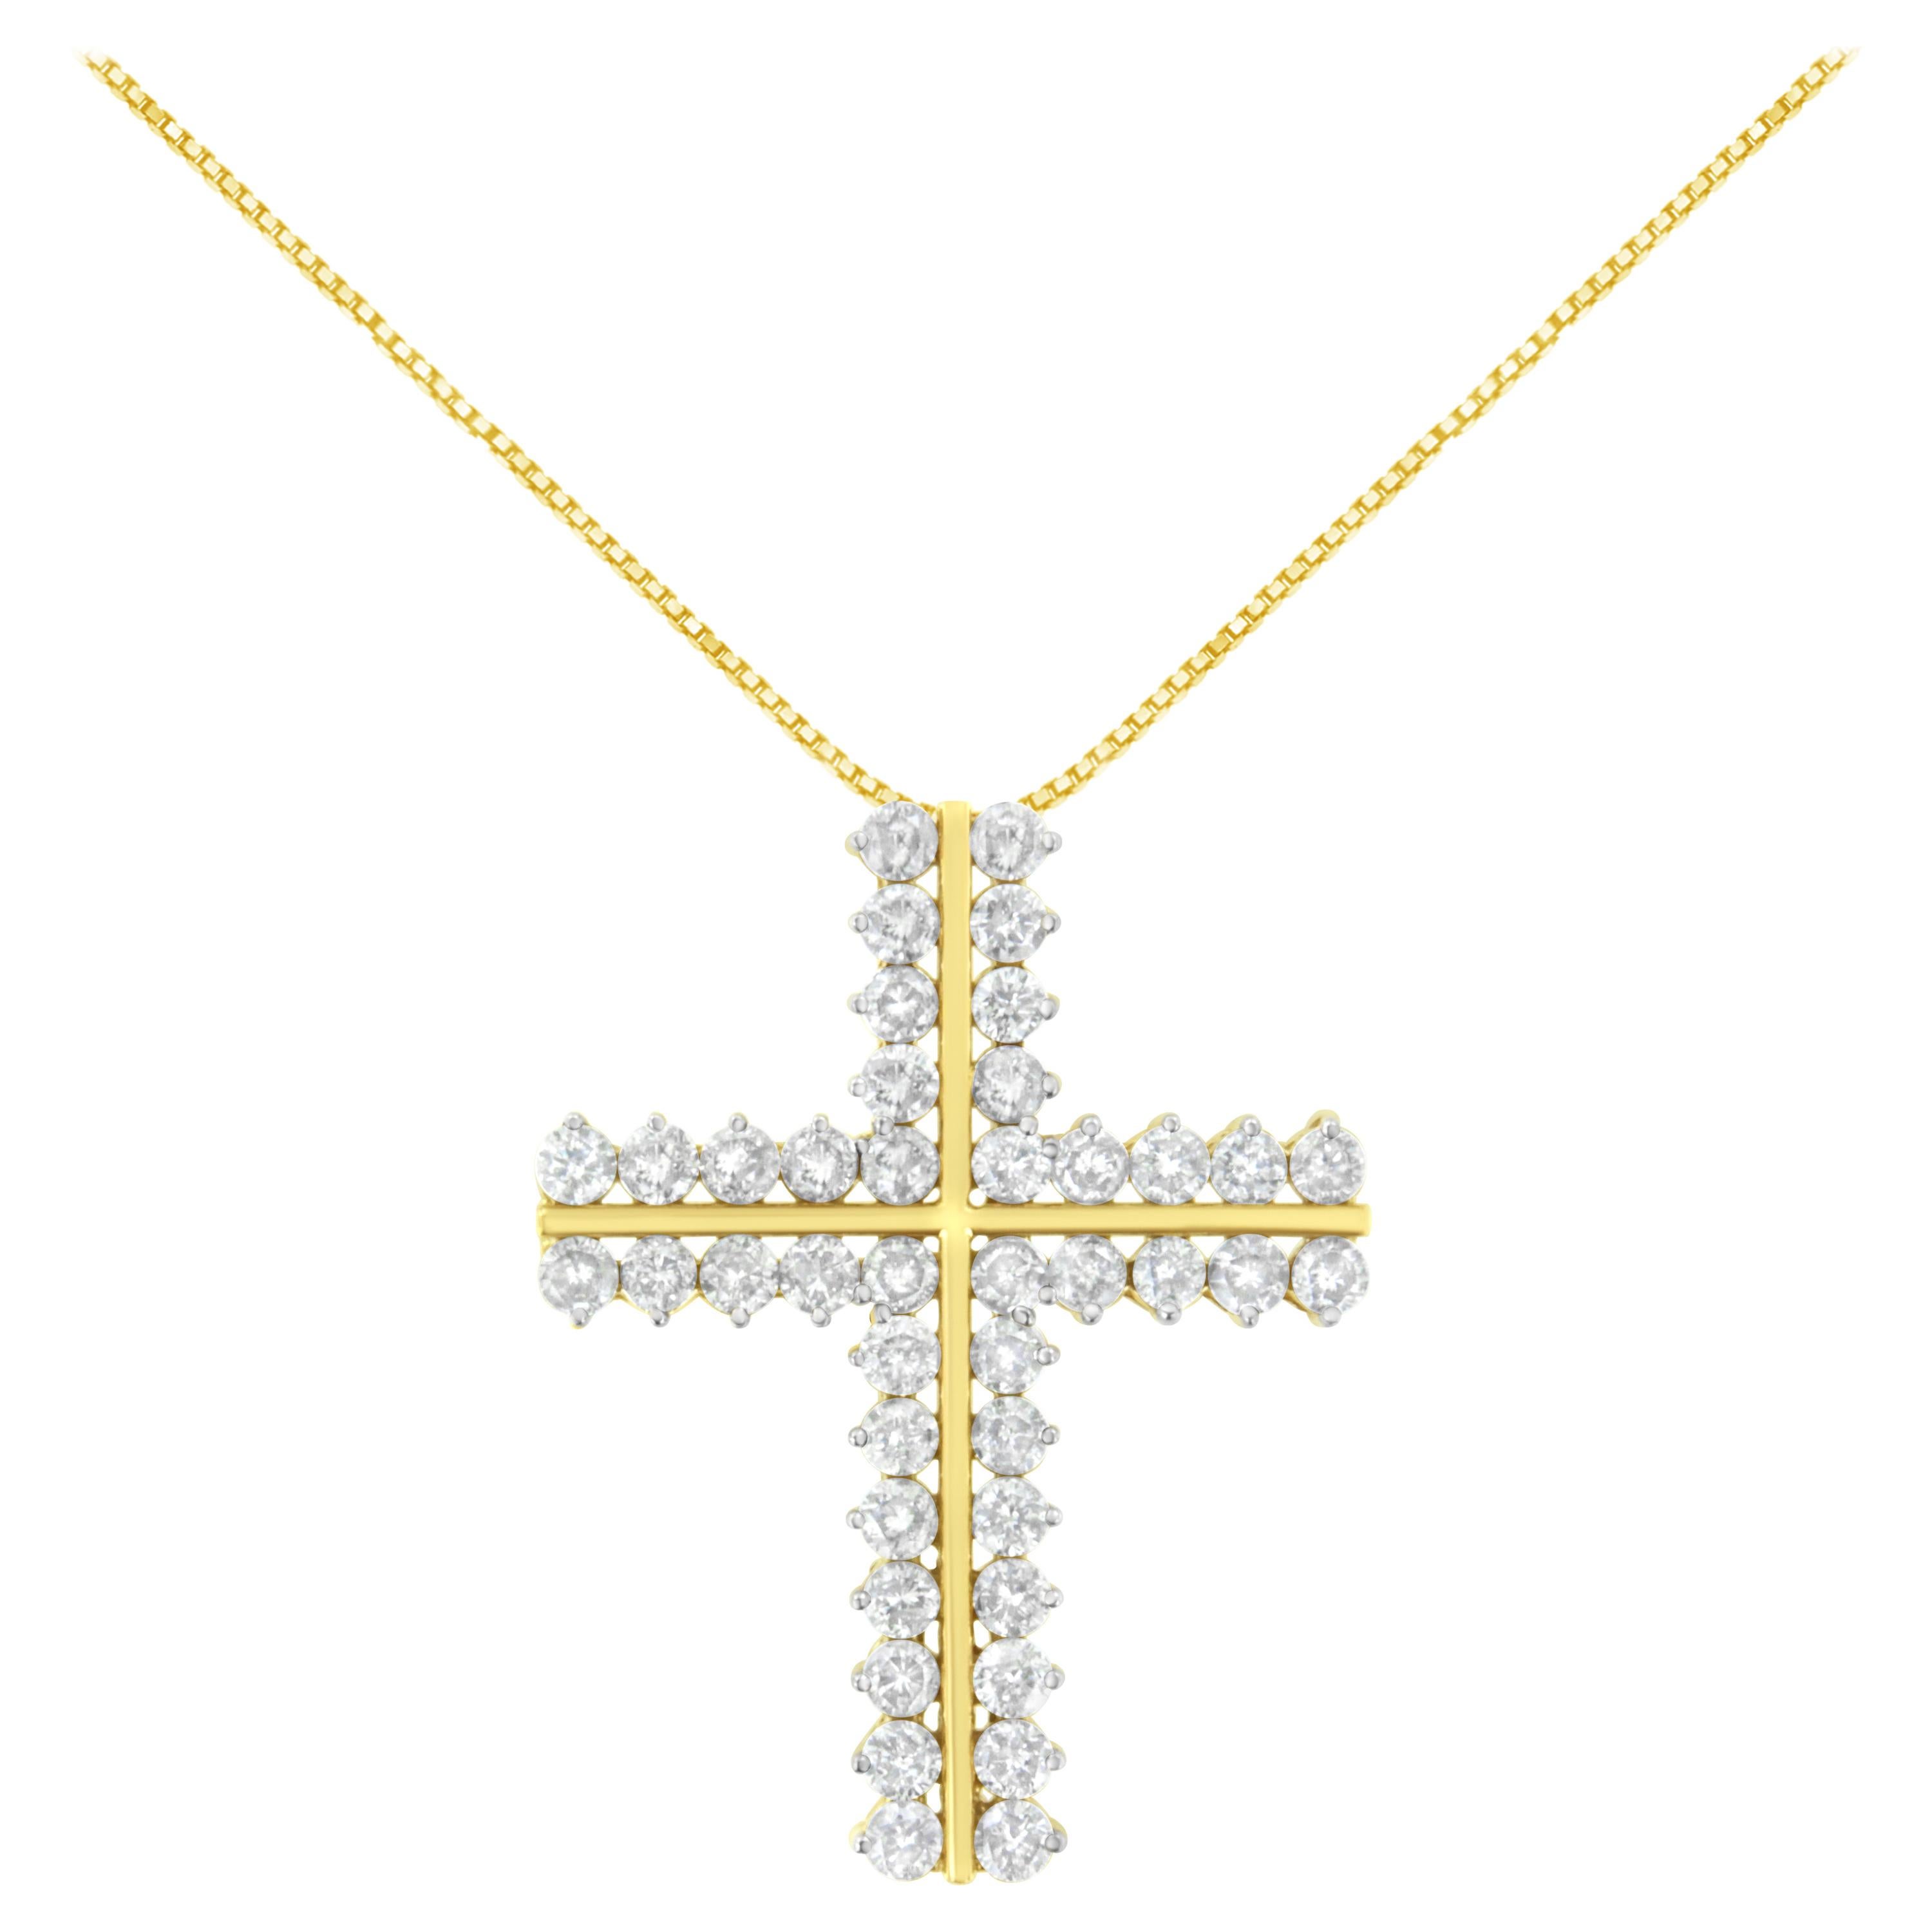 10K Yellow Gold 4 Carat Diamond Two Row Cross Pendant Necklace For Sale